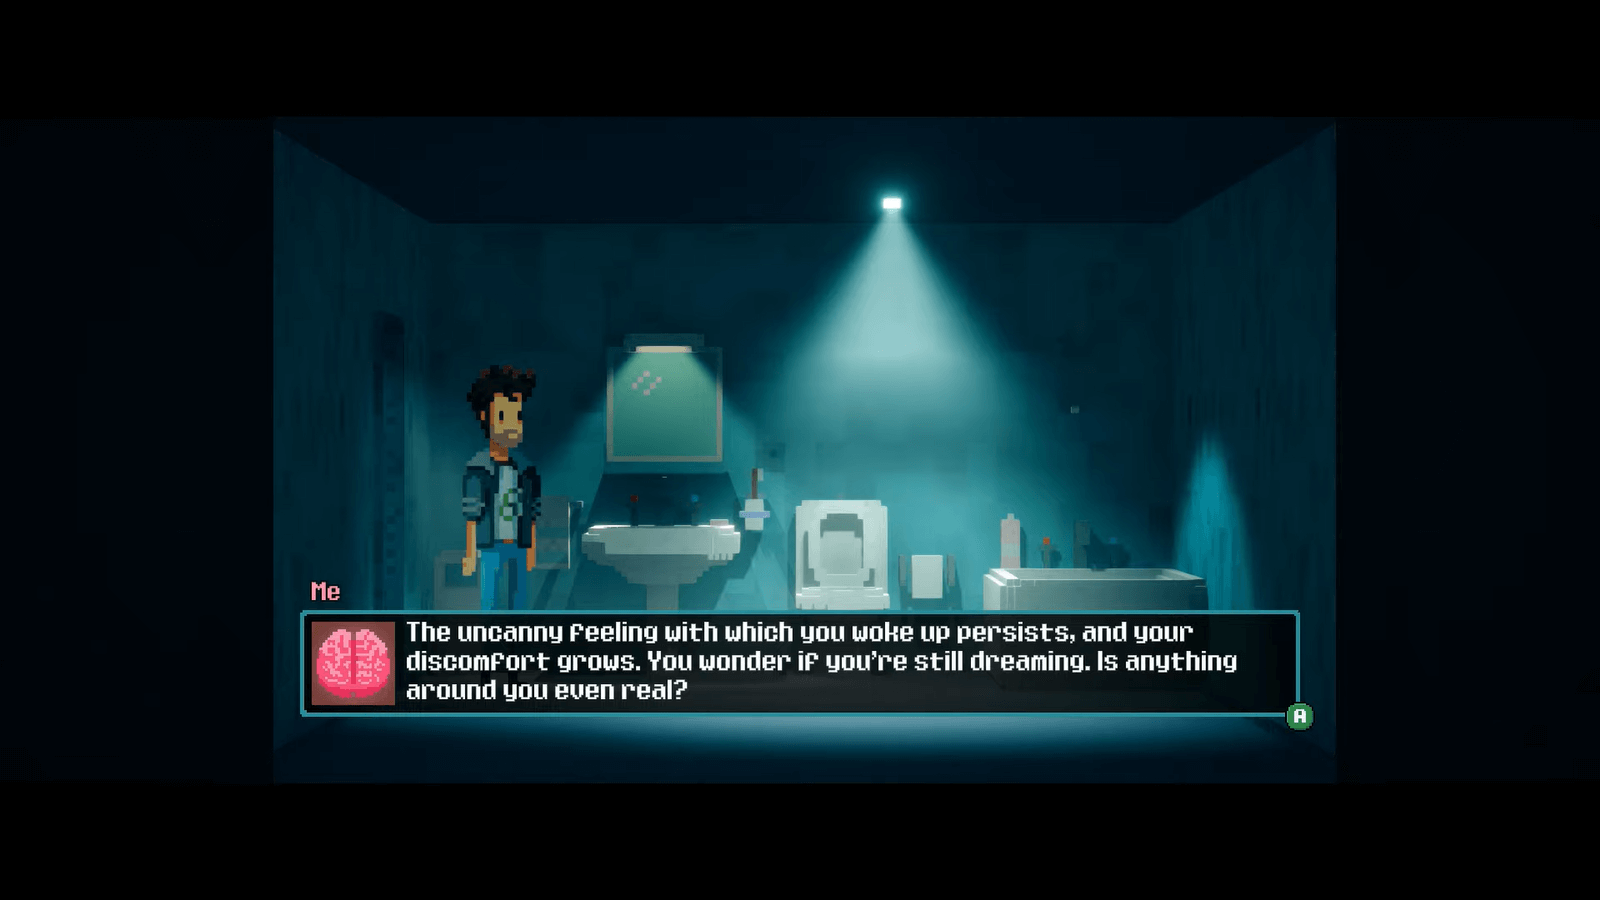 A pixel art bathroom bathed in light from above features in the background. A man stands in the foreground. A string of text is at the bottom